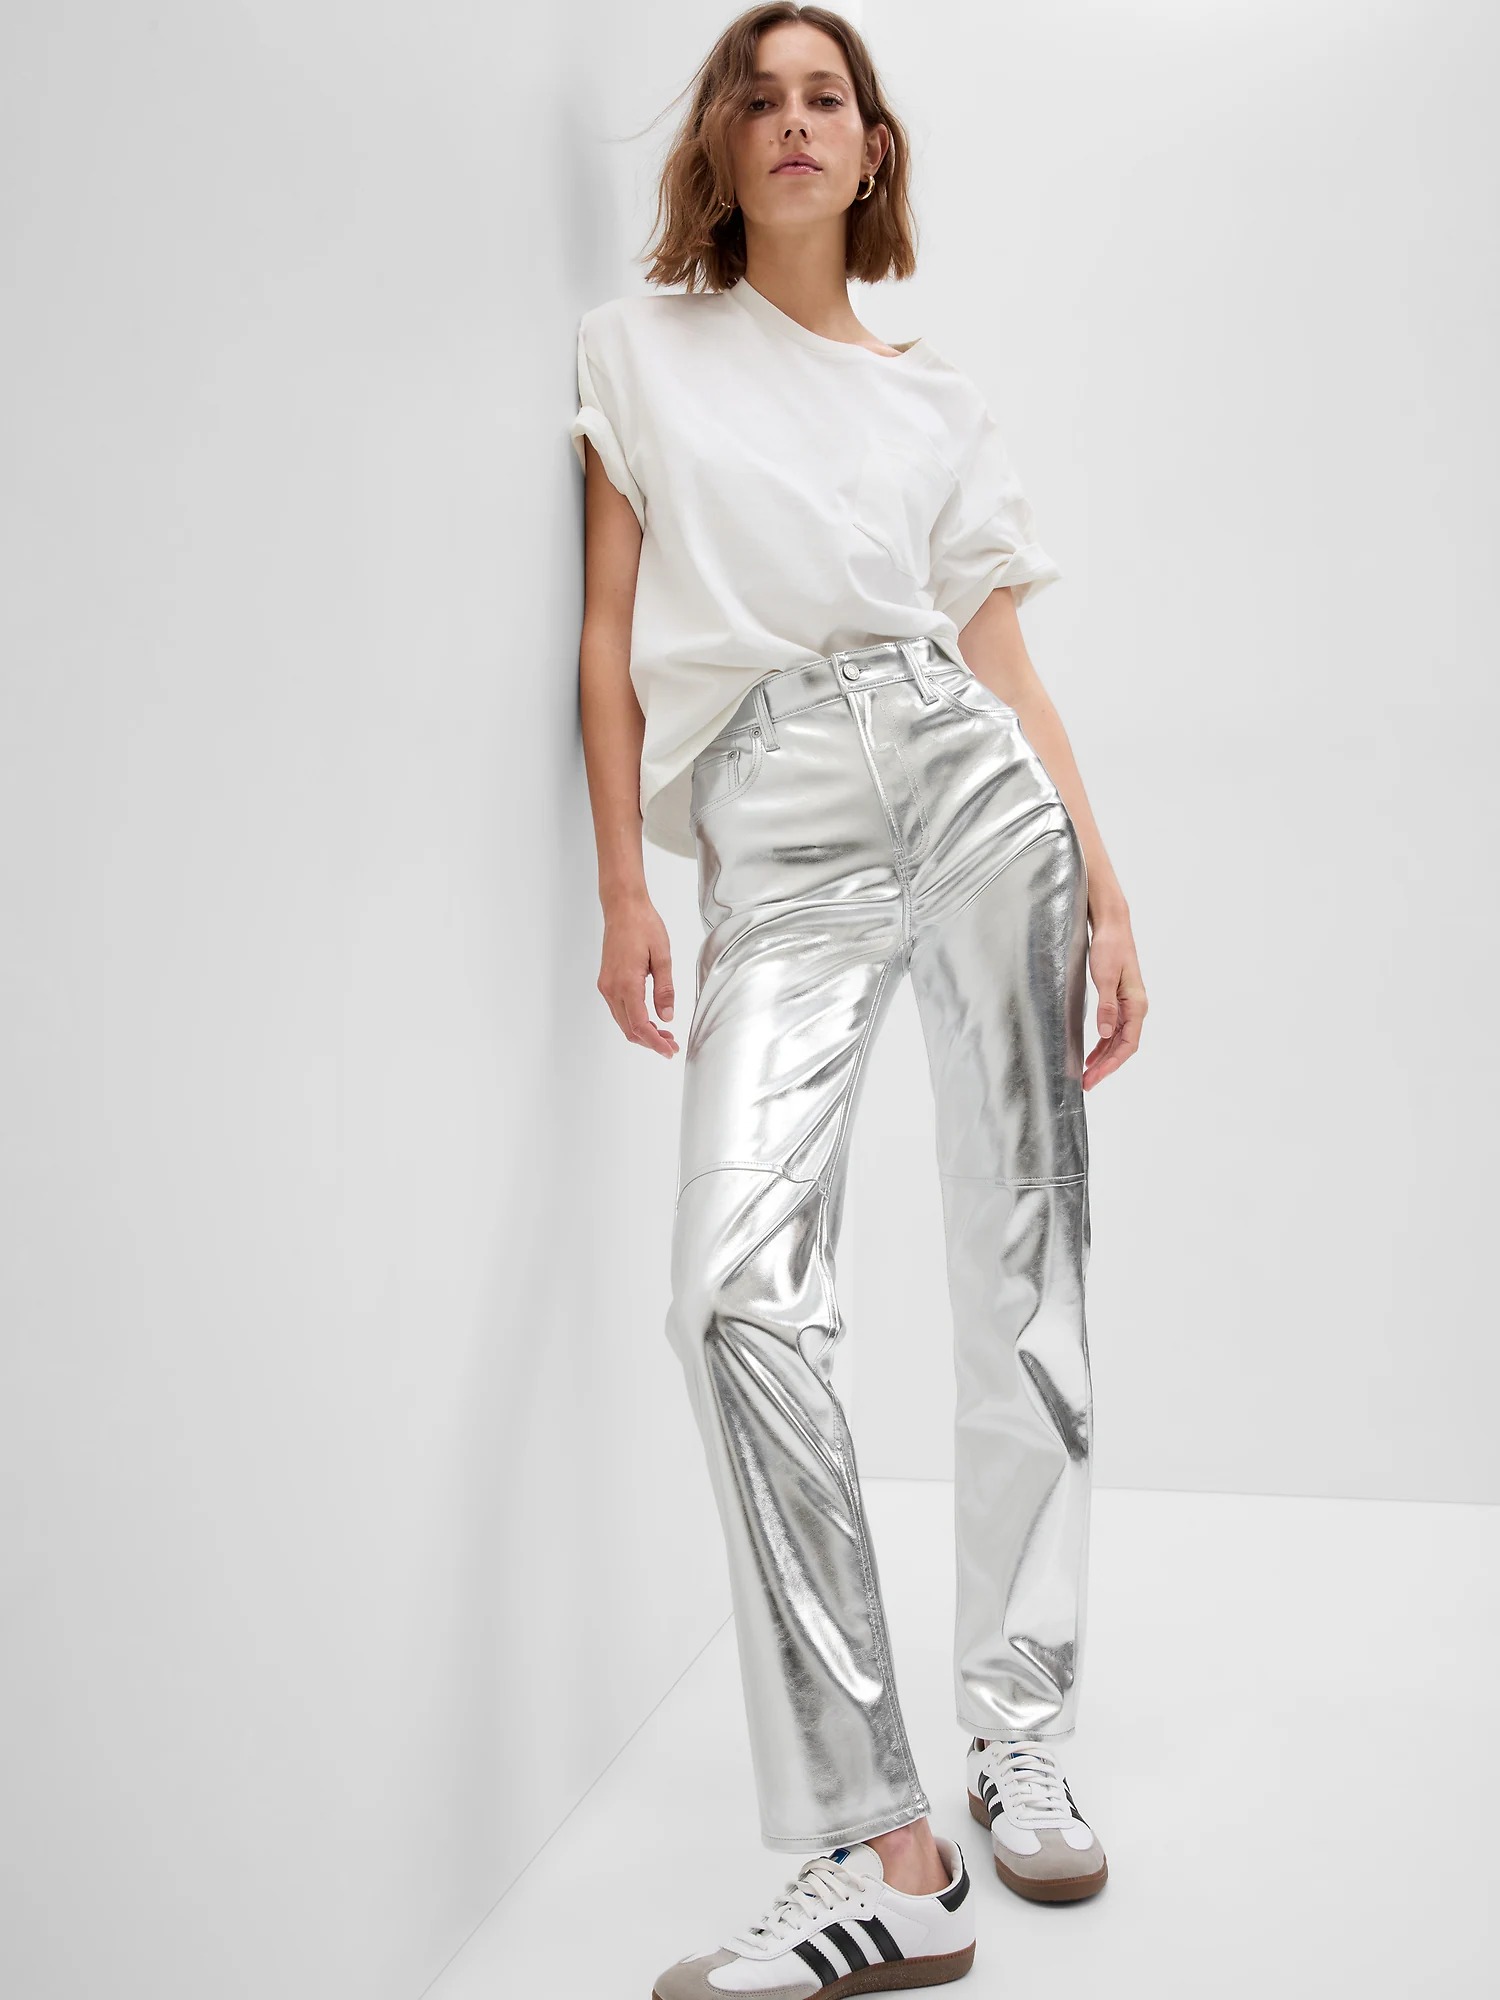 The Metallic Trend Fashion People Are Wearing This Spring Who What Wear